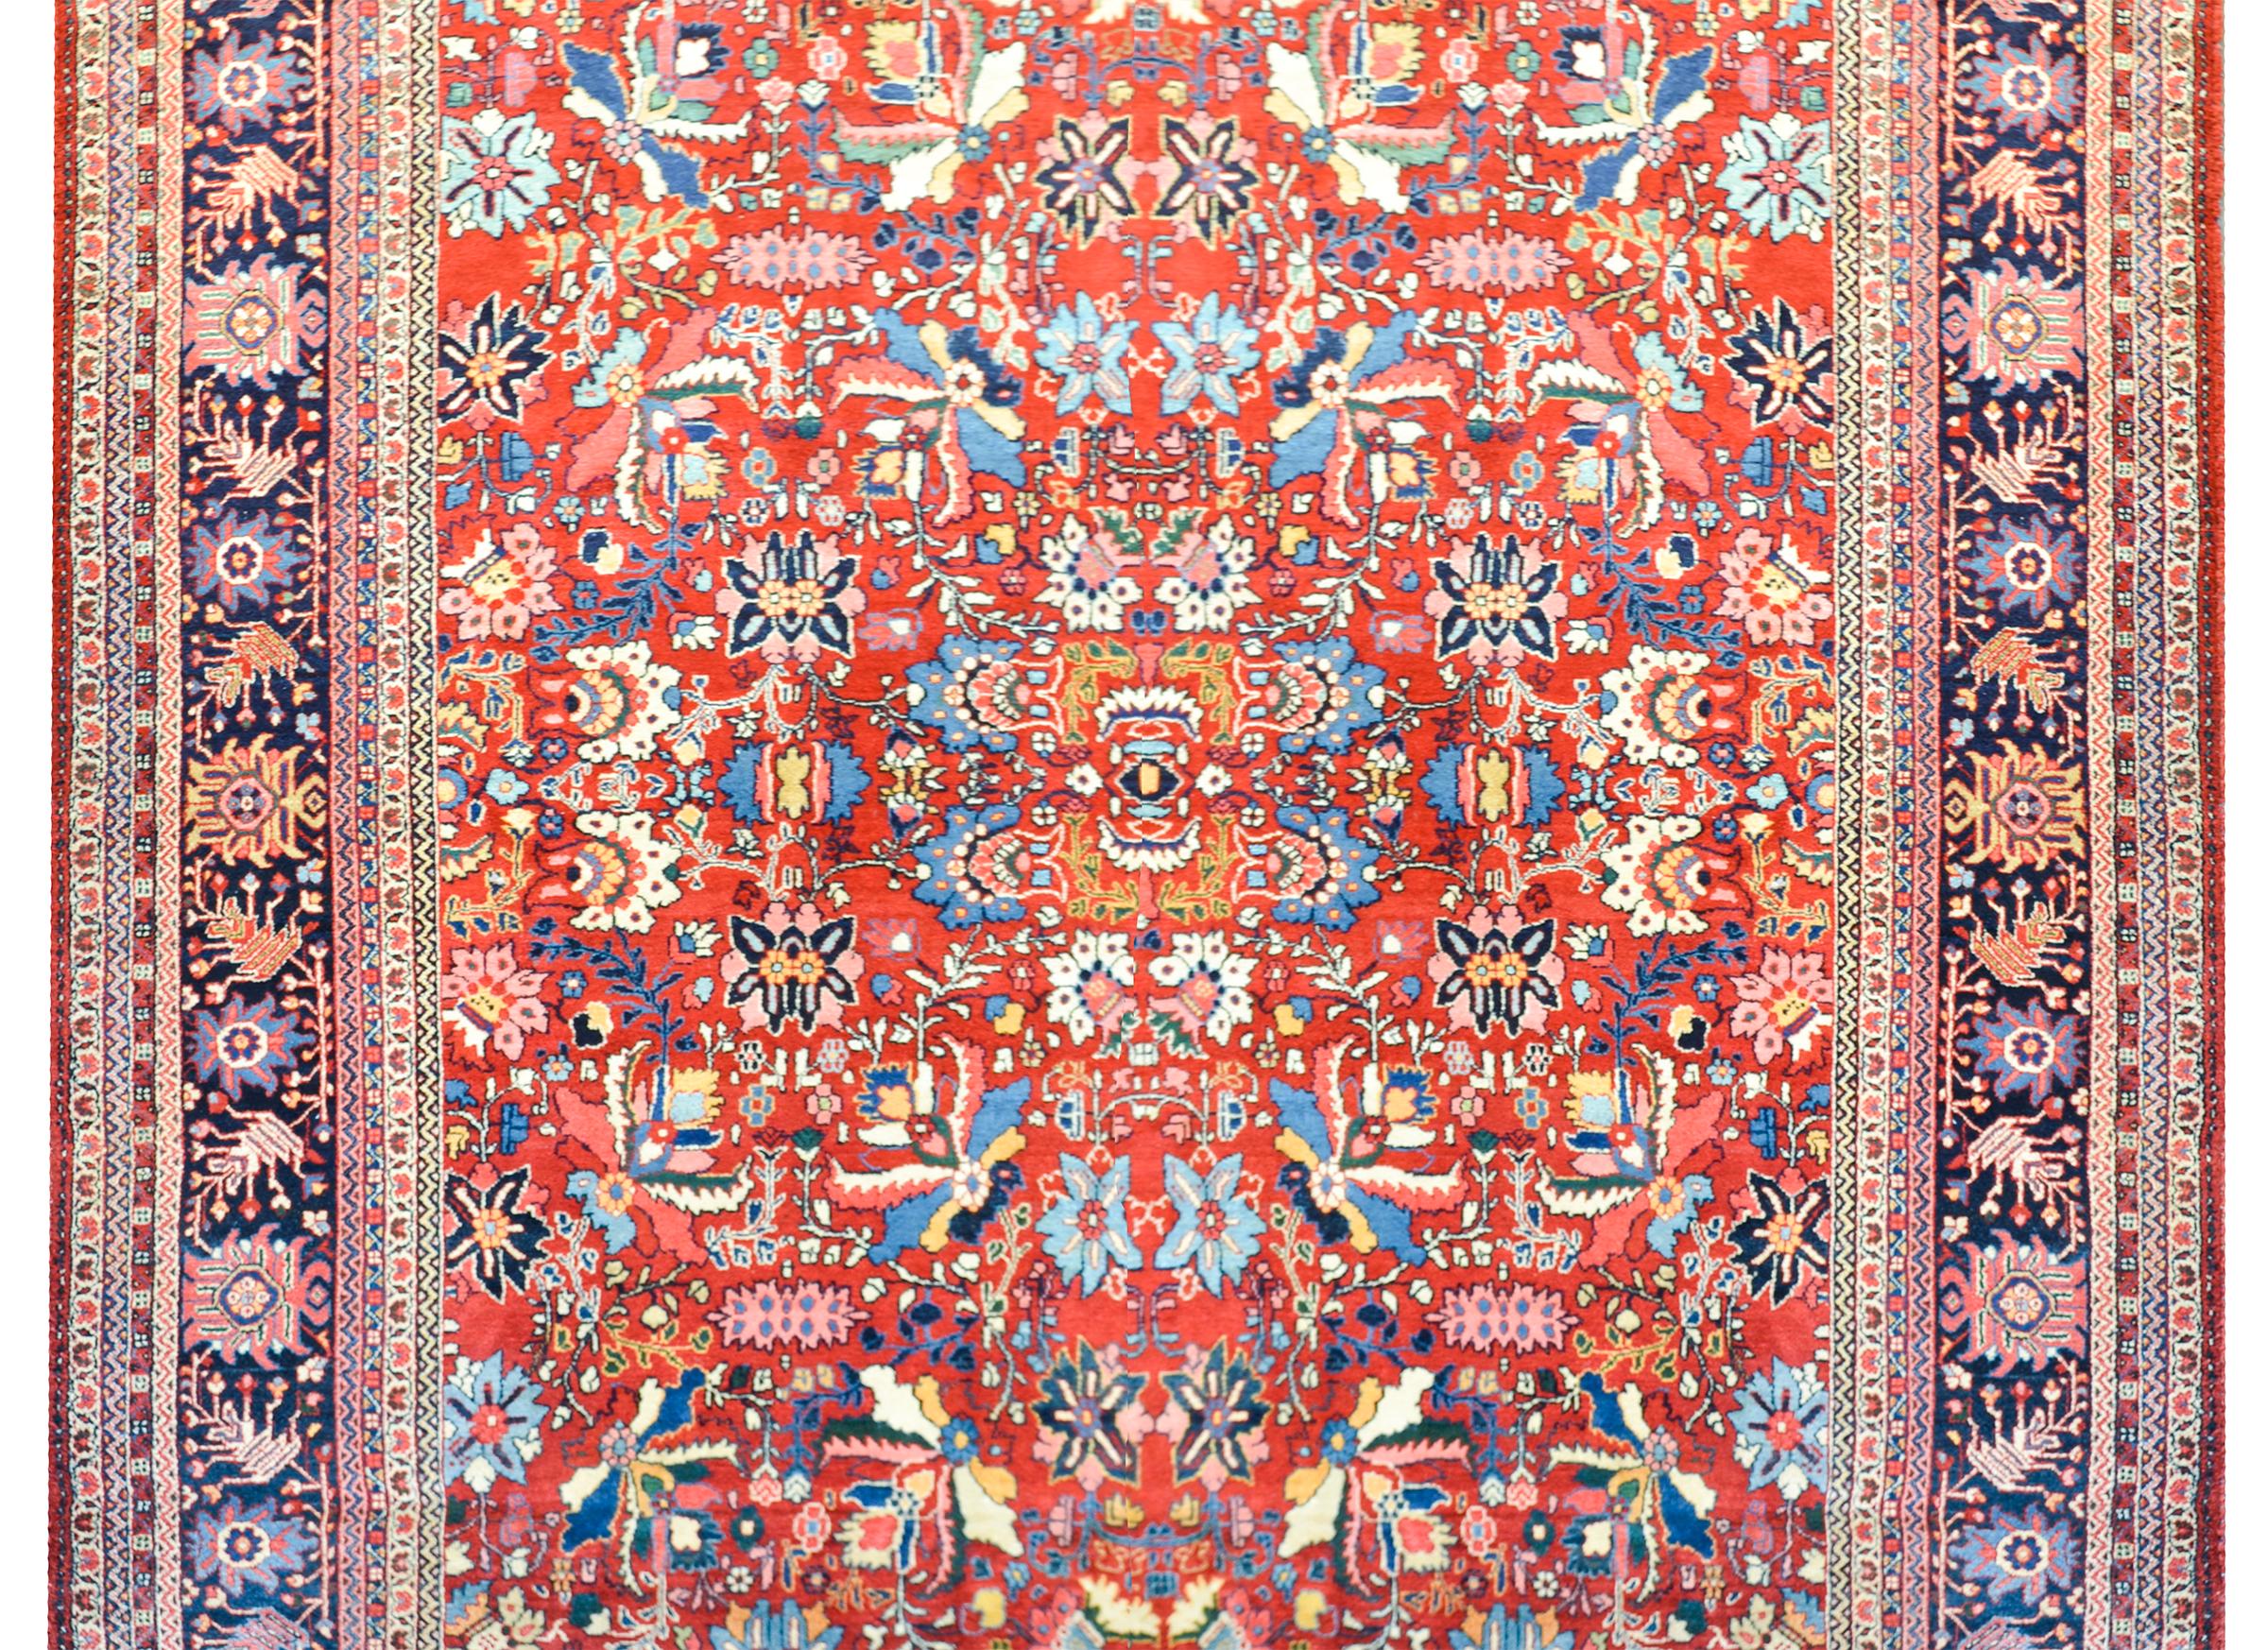 An outstanding early 20th century Mahal rug with an all-over mirrored floral pattern woven in bold colors including pink, light and dark indigo, and white, set against a dark crimson background, and surrounded by a wide border with a large-scale